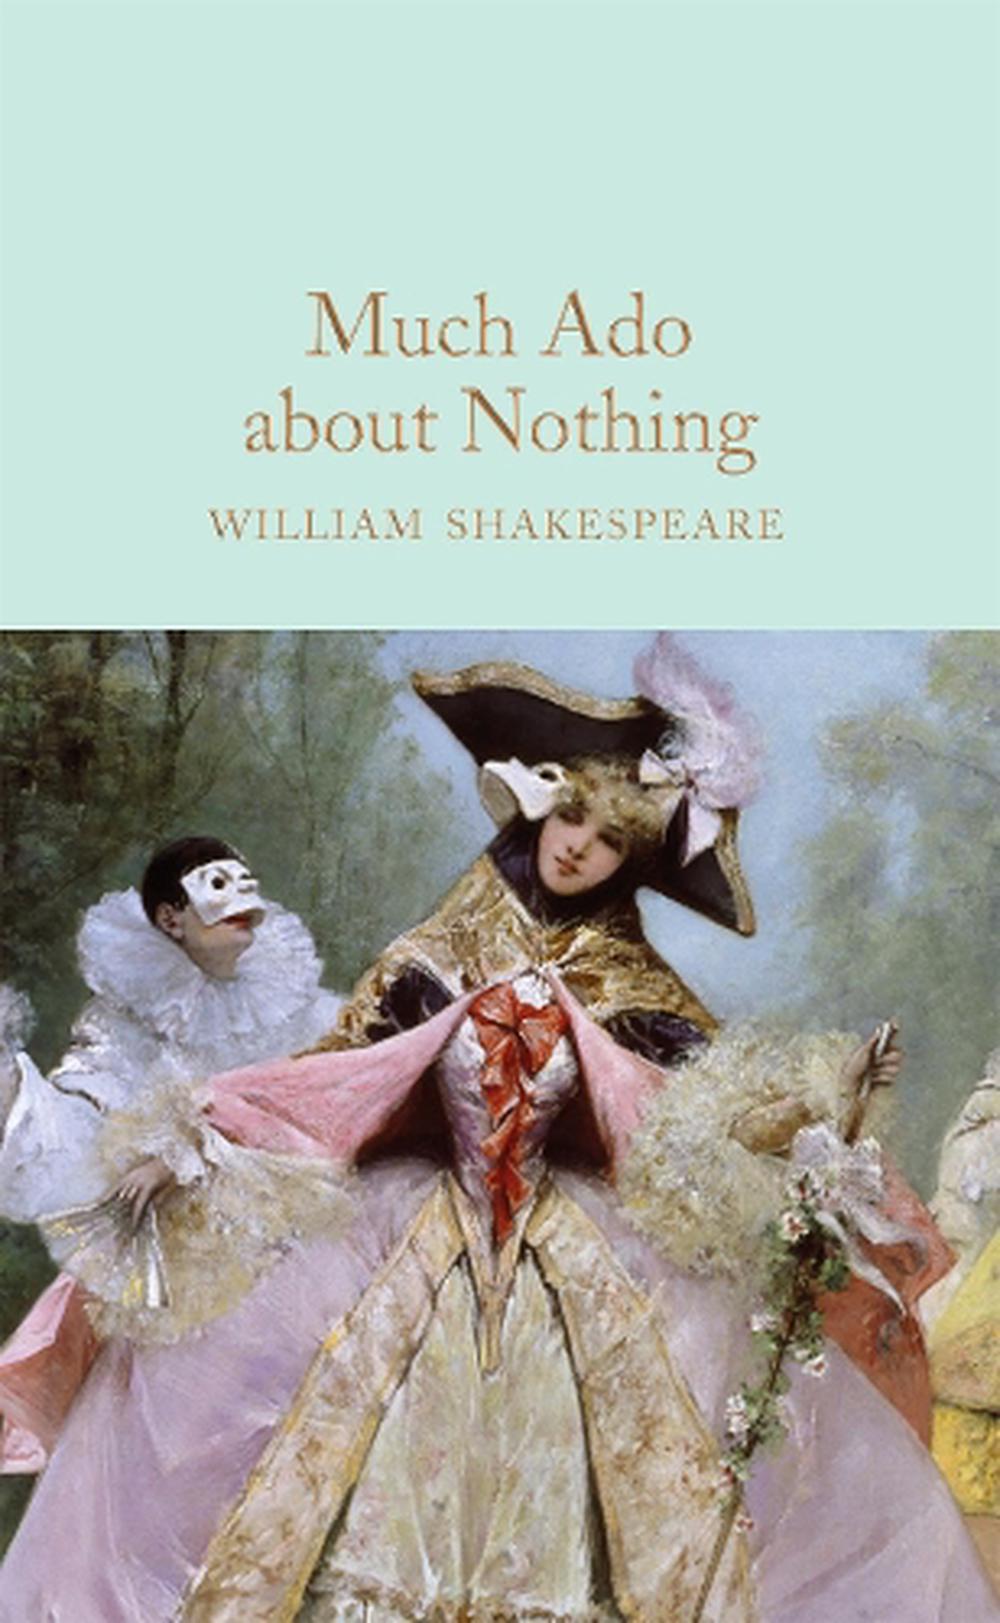 much ado about nothing essay vce